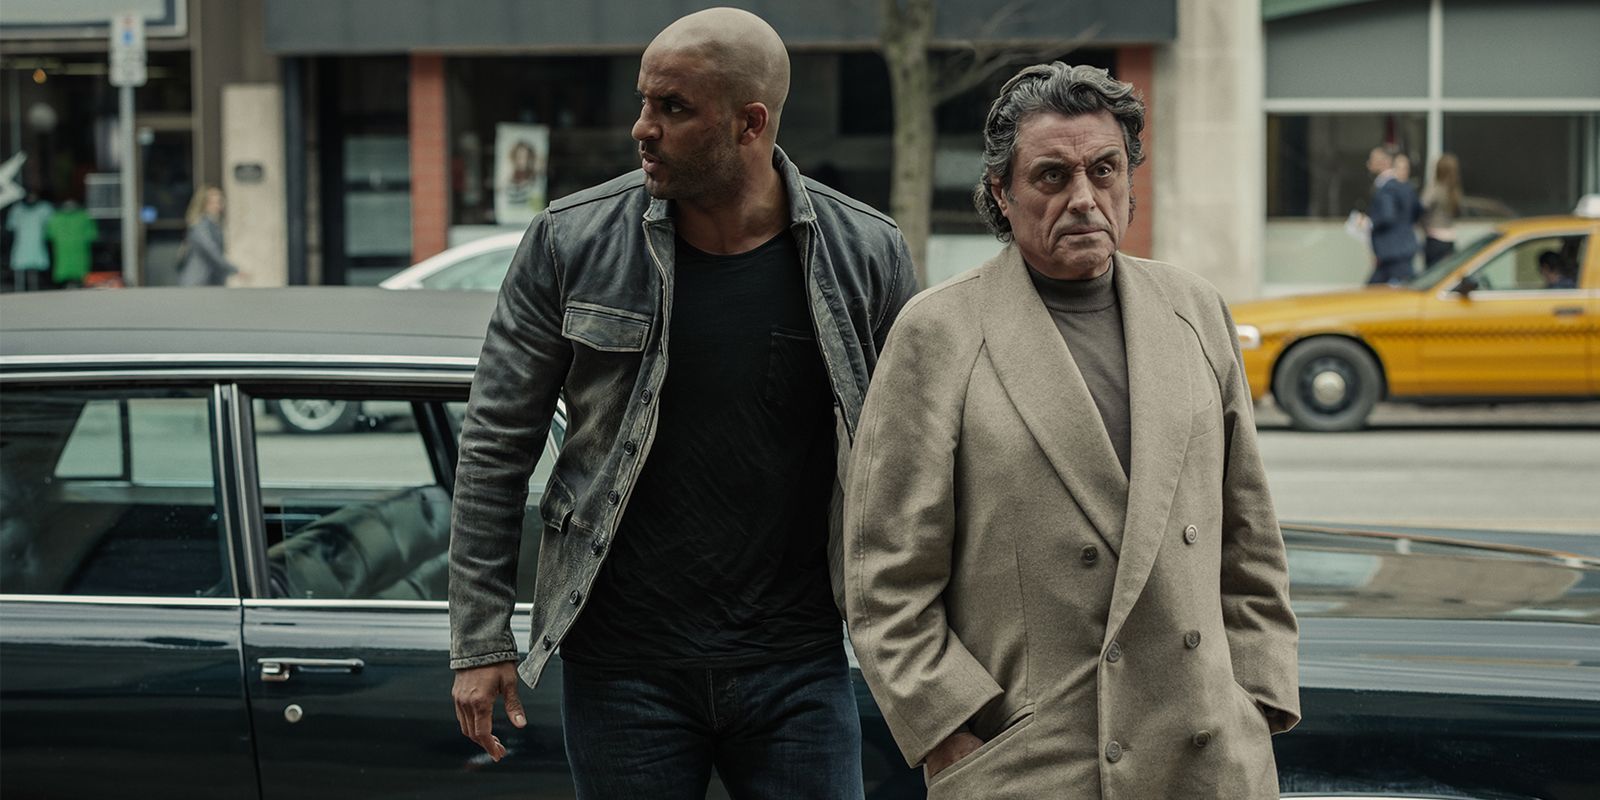 American Gods Explores the Limits of the American Dream in Episode 3